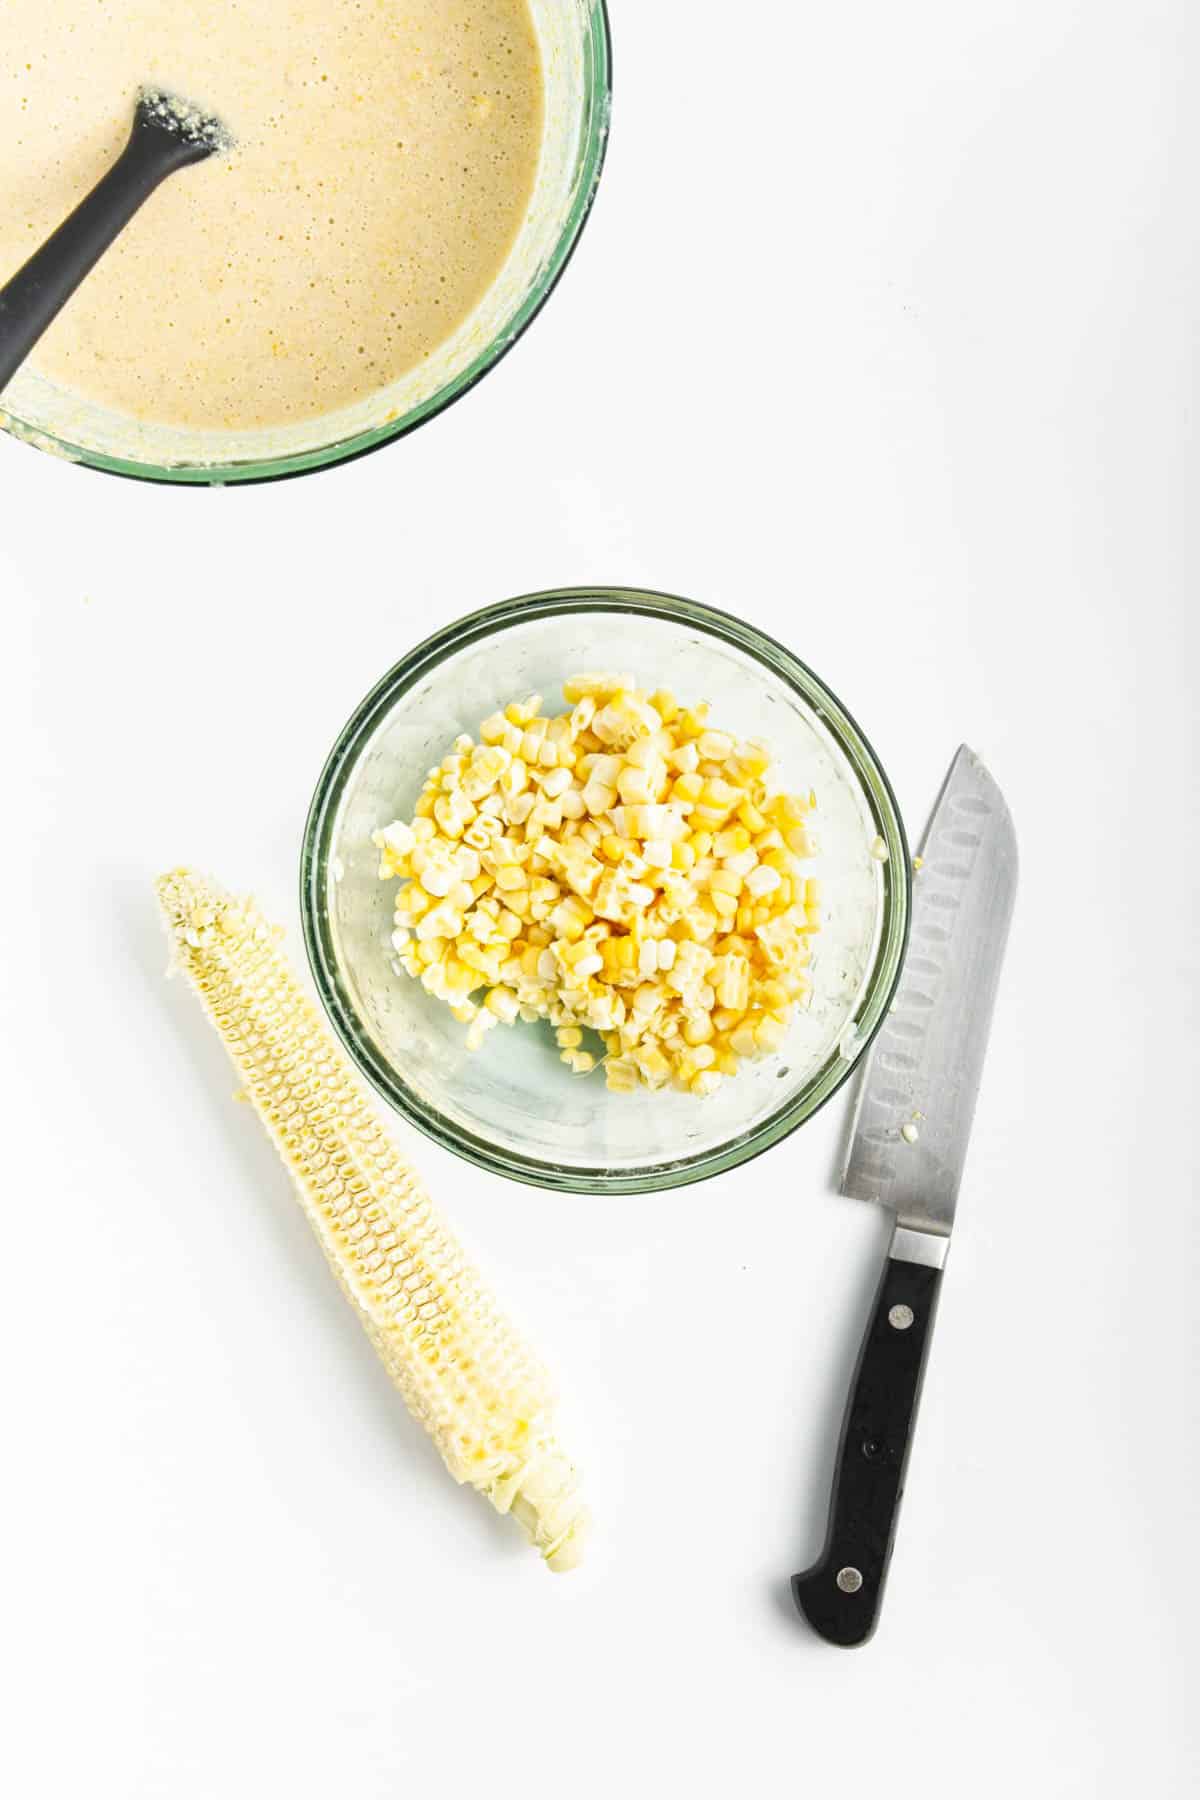 Cornbread batter in glass bowl and smaller glass bowl of corn kernals and empty cob.